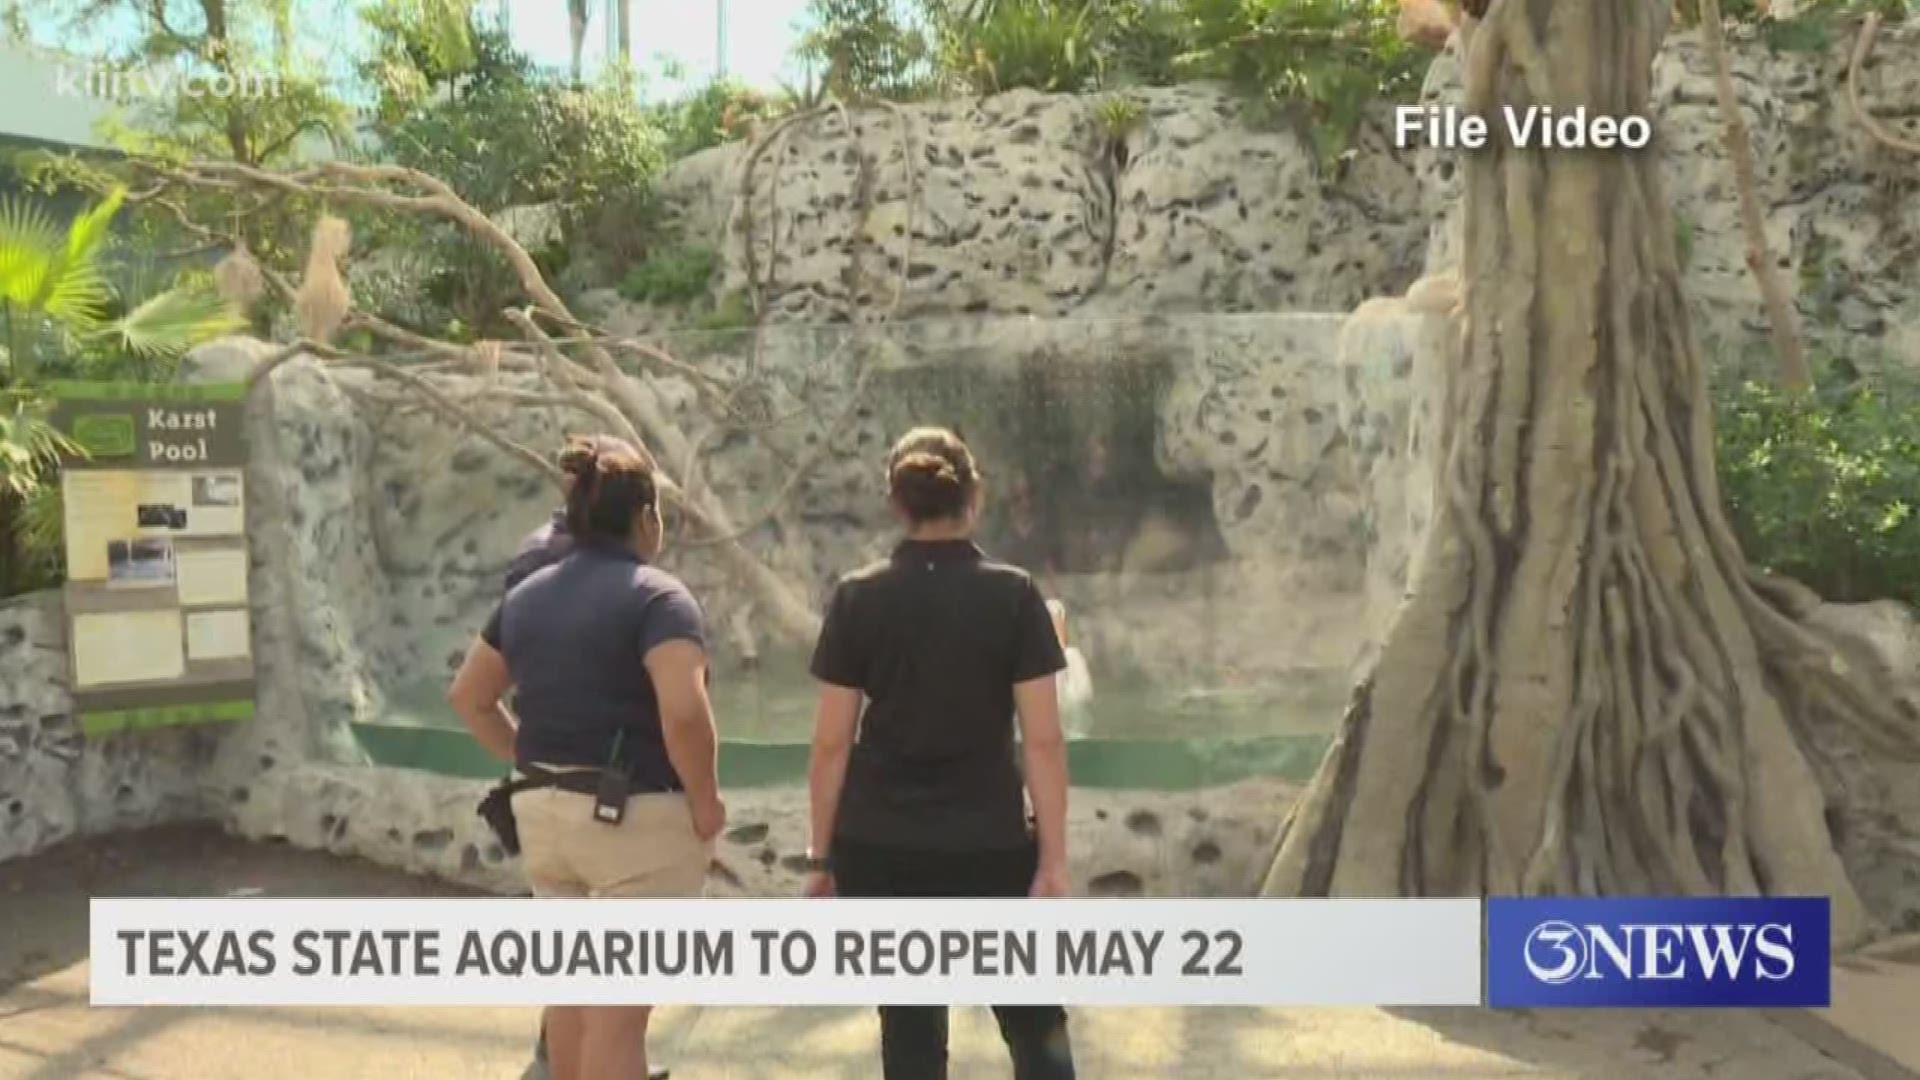 Aquariums around the state will be allowed to reopen Friday, and that includes our very own Texas State Aquarium in Corpus Christi.